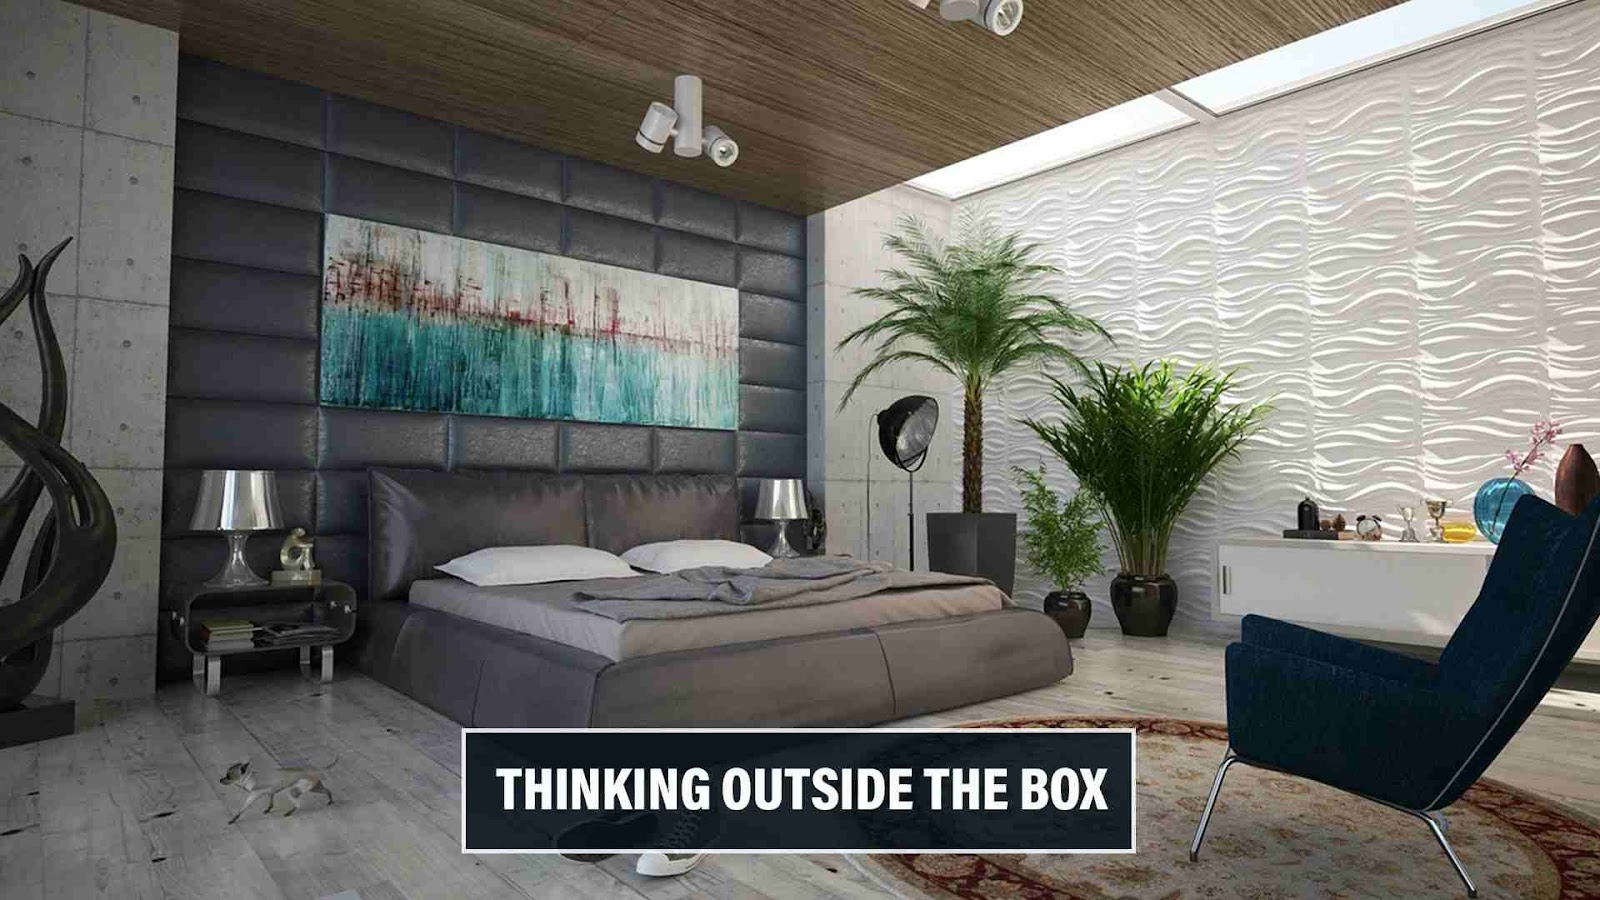 Unusual Bedroom Ideas: Thinking Outside the Box